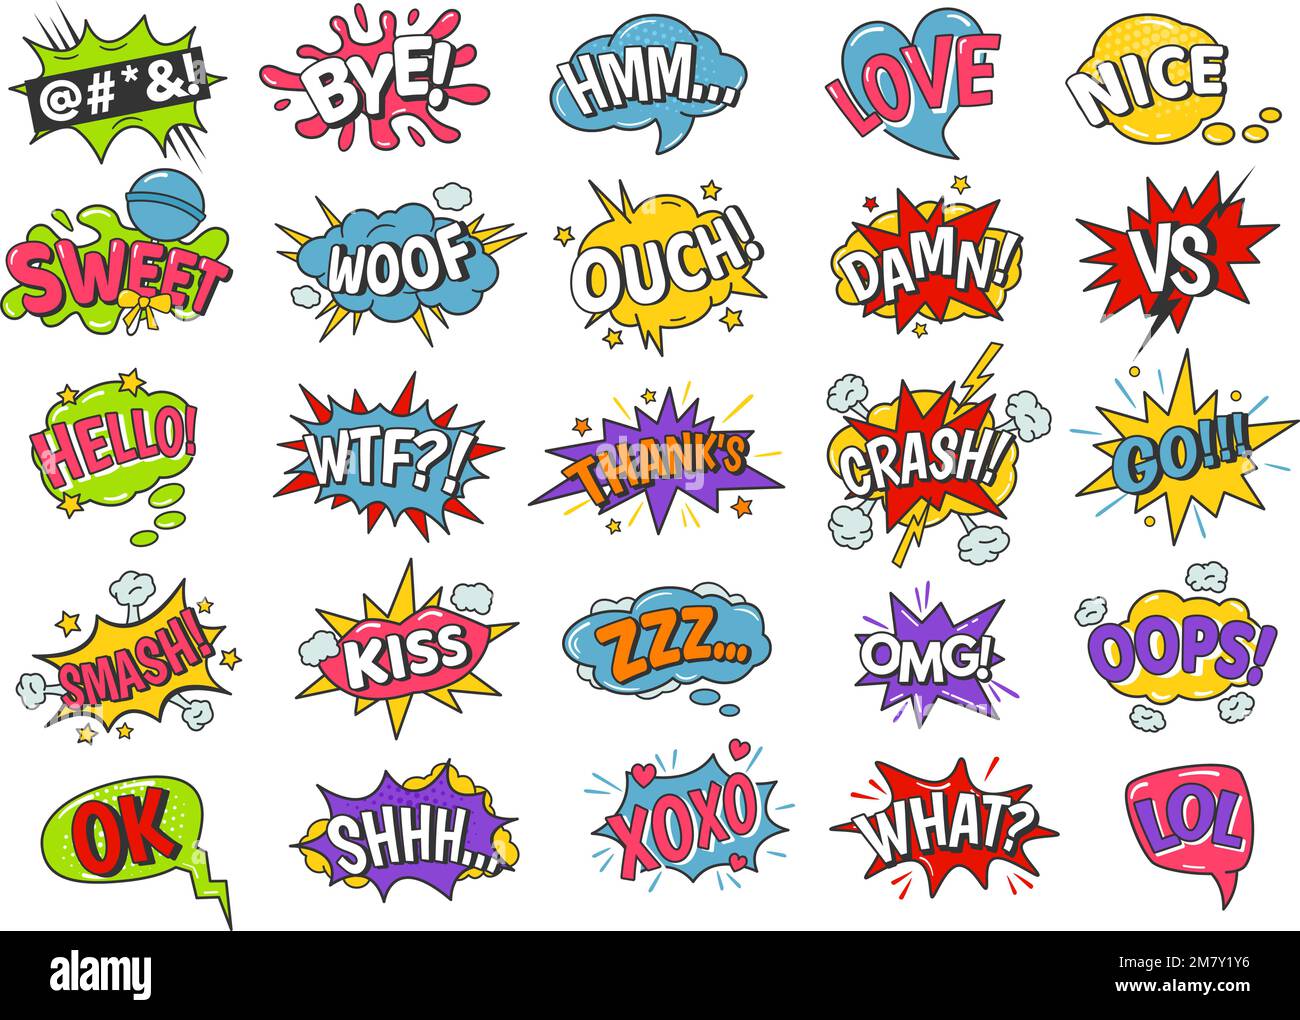 Cartoon speech bubbles. Comic book funny sound effects, xoxo kiss, sweet and smash. Omg, lol and love text balloon vector set Stock Vector